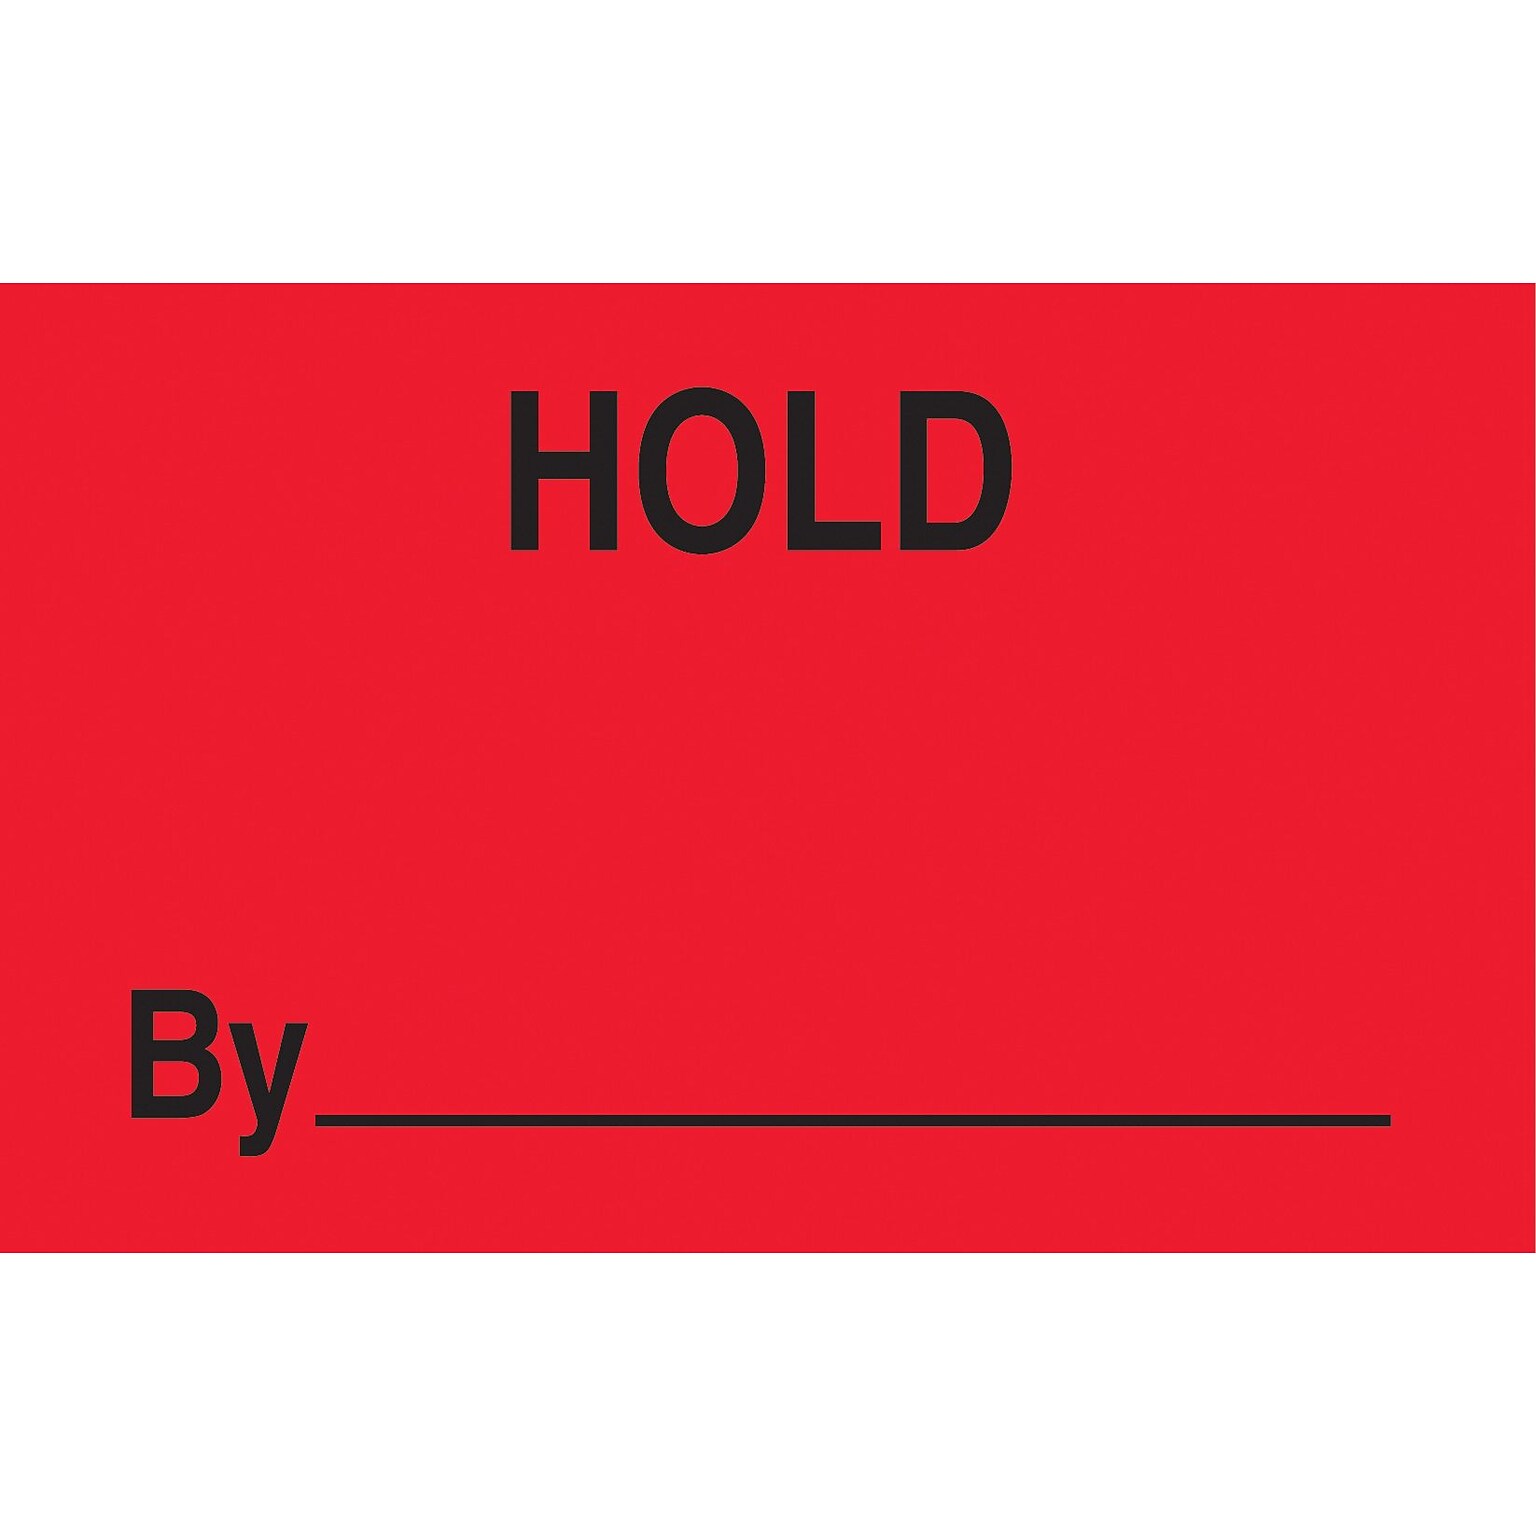 Hold By ________ Labels, Red/Black, 5 x 3, 500/Rl